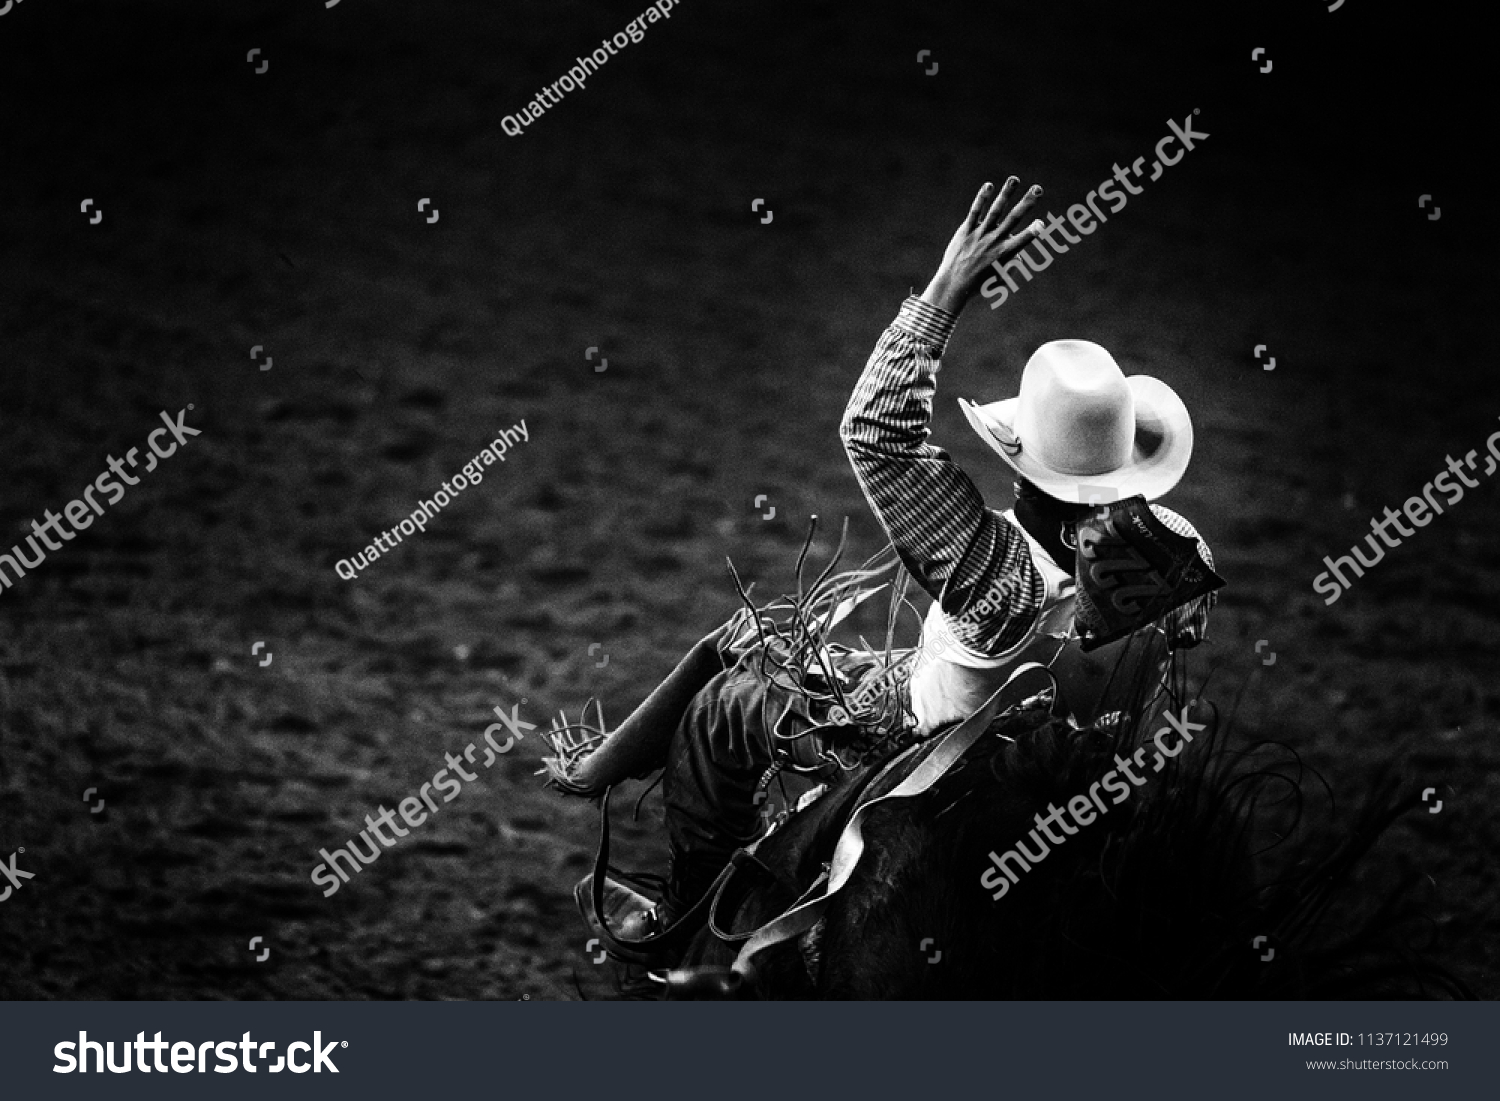 Monochrome rodeo cowboy in a white hat riding a bronco in the spotlight #1137121499